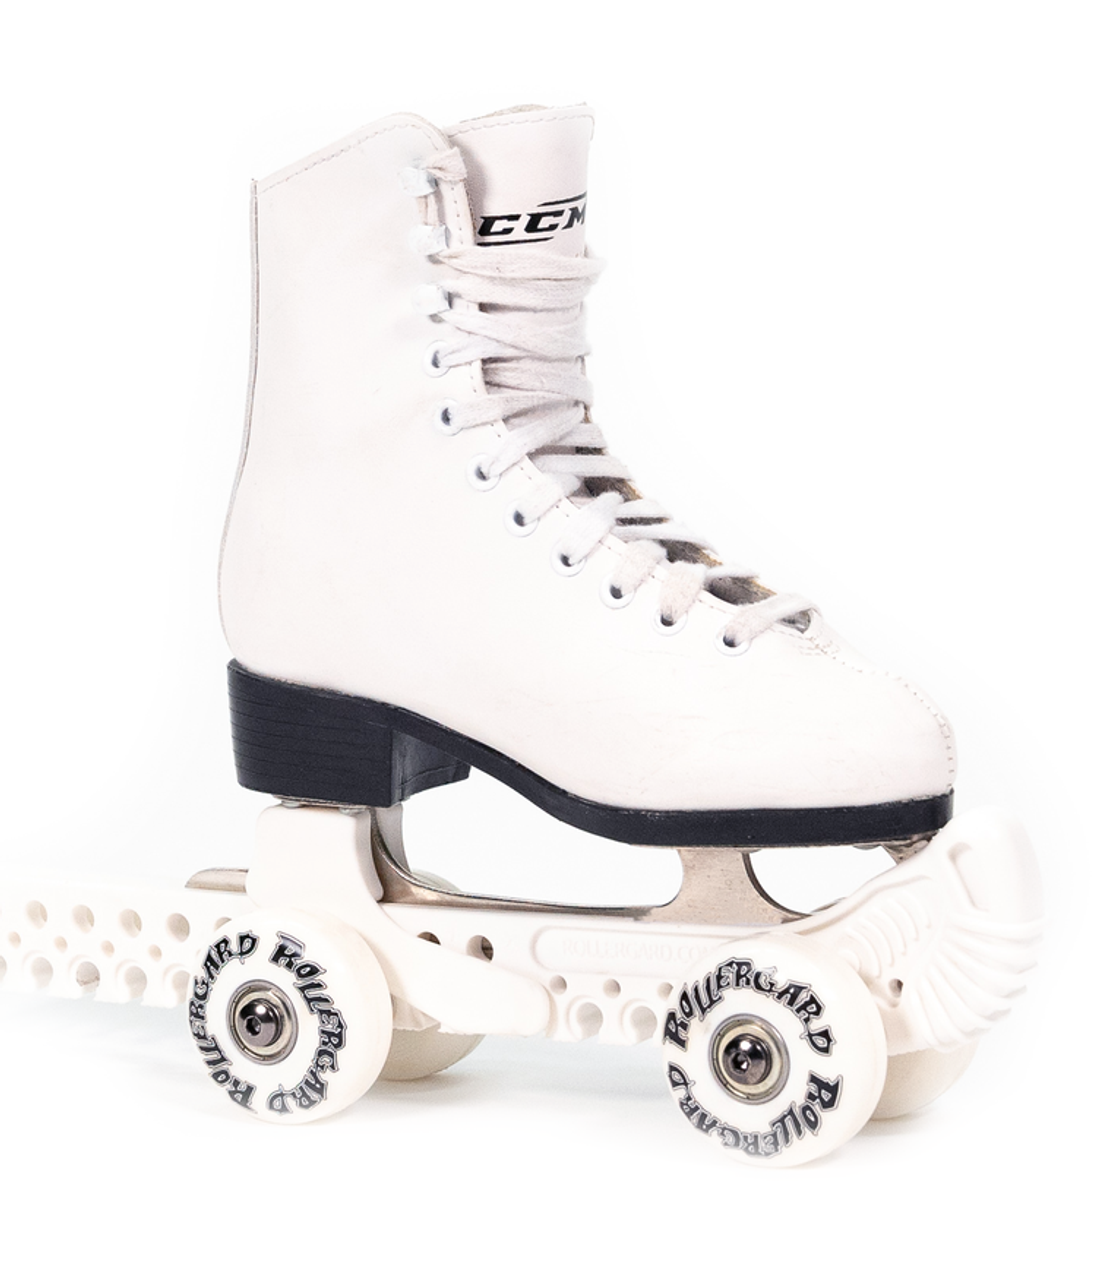 Edea Spinner - Ice, InLine and Roller Figure Skating Off Rink practice